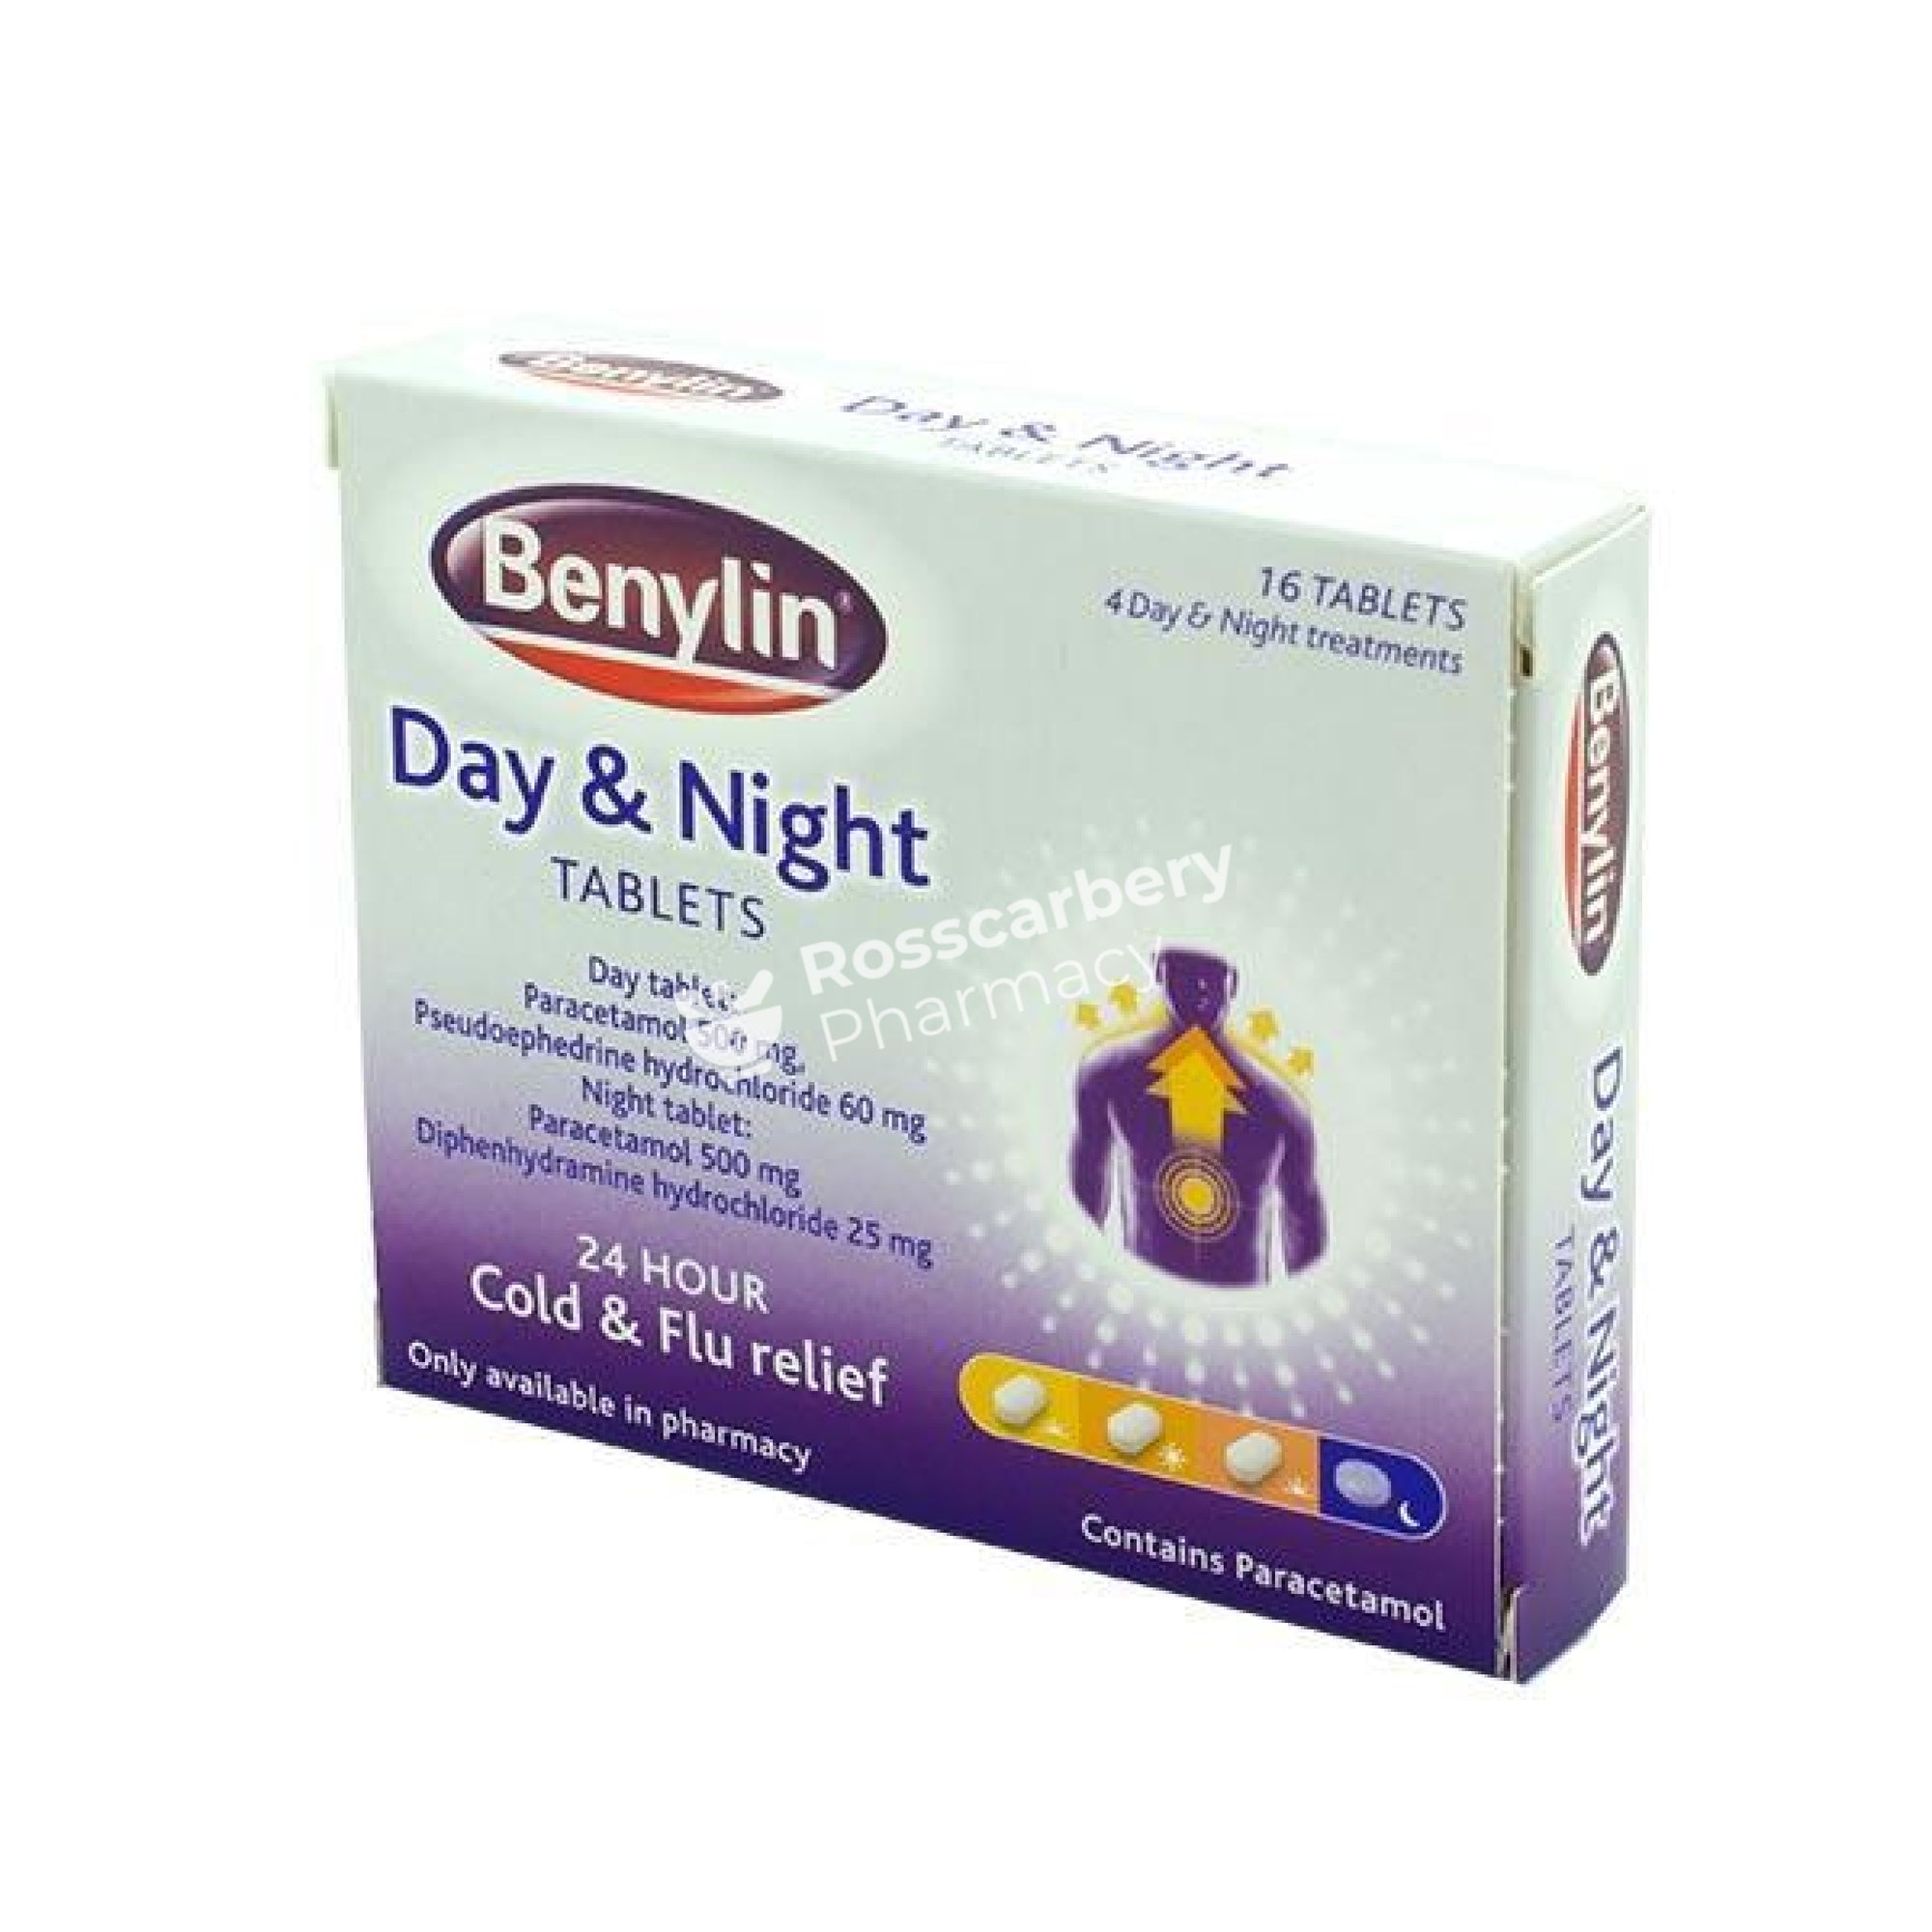 Benylin Day & Night Tablets Cold Flu Combination Products